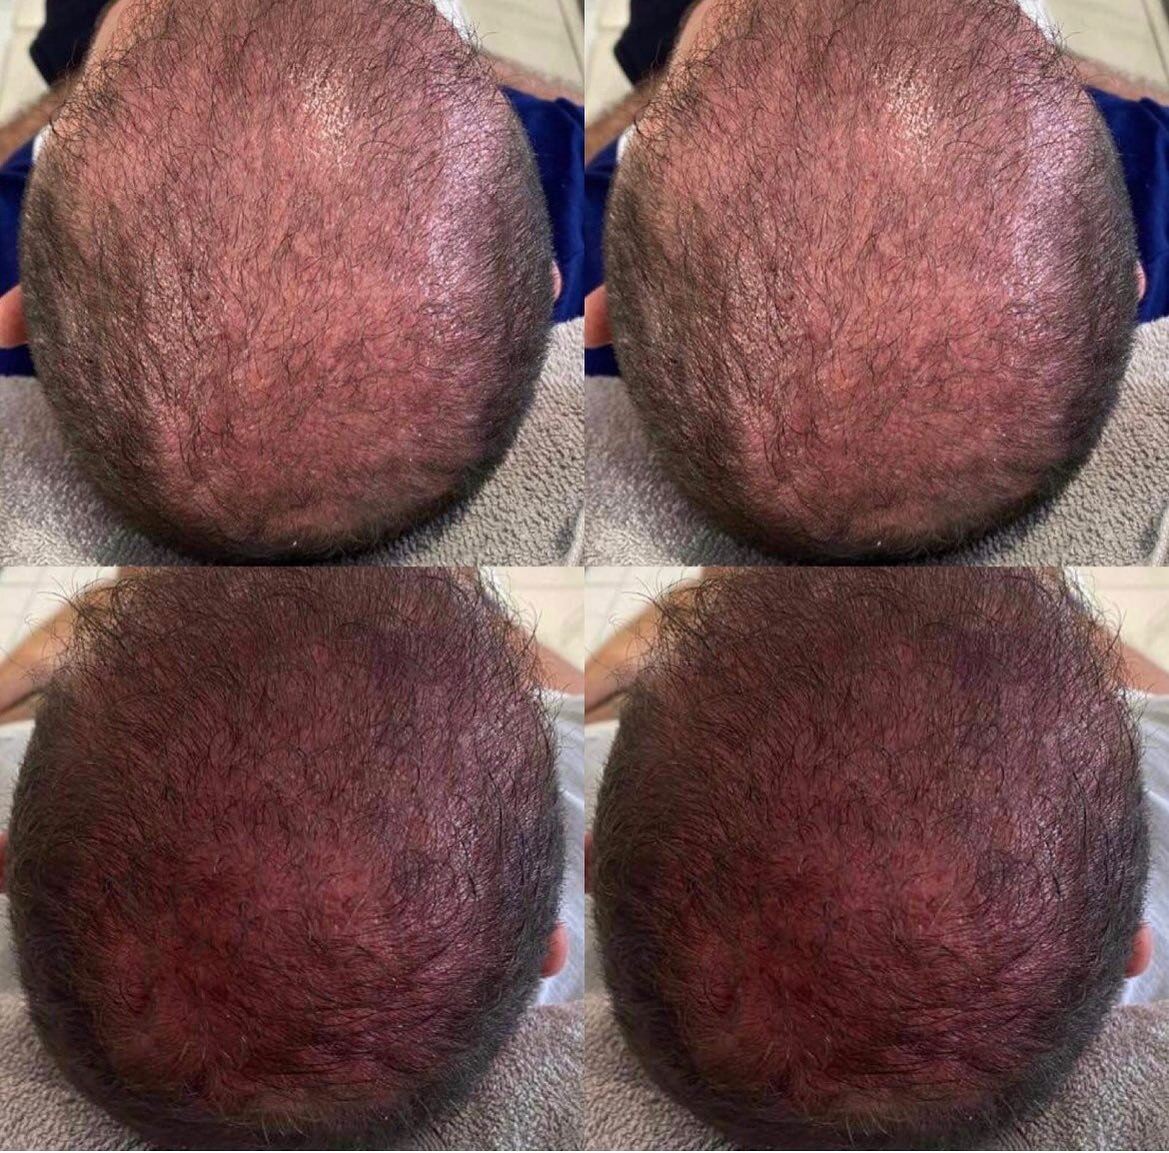 This client came to us post hair transplant for his PRP aftercare. PRP makes grafted hair stronger. It helps the new follicles survive better leading to new hair growth. 
PRP can also be used to treat hair loss/thinning 
#prp #hairtransplant # hairlo